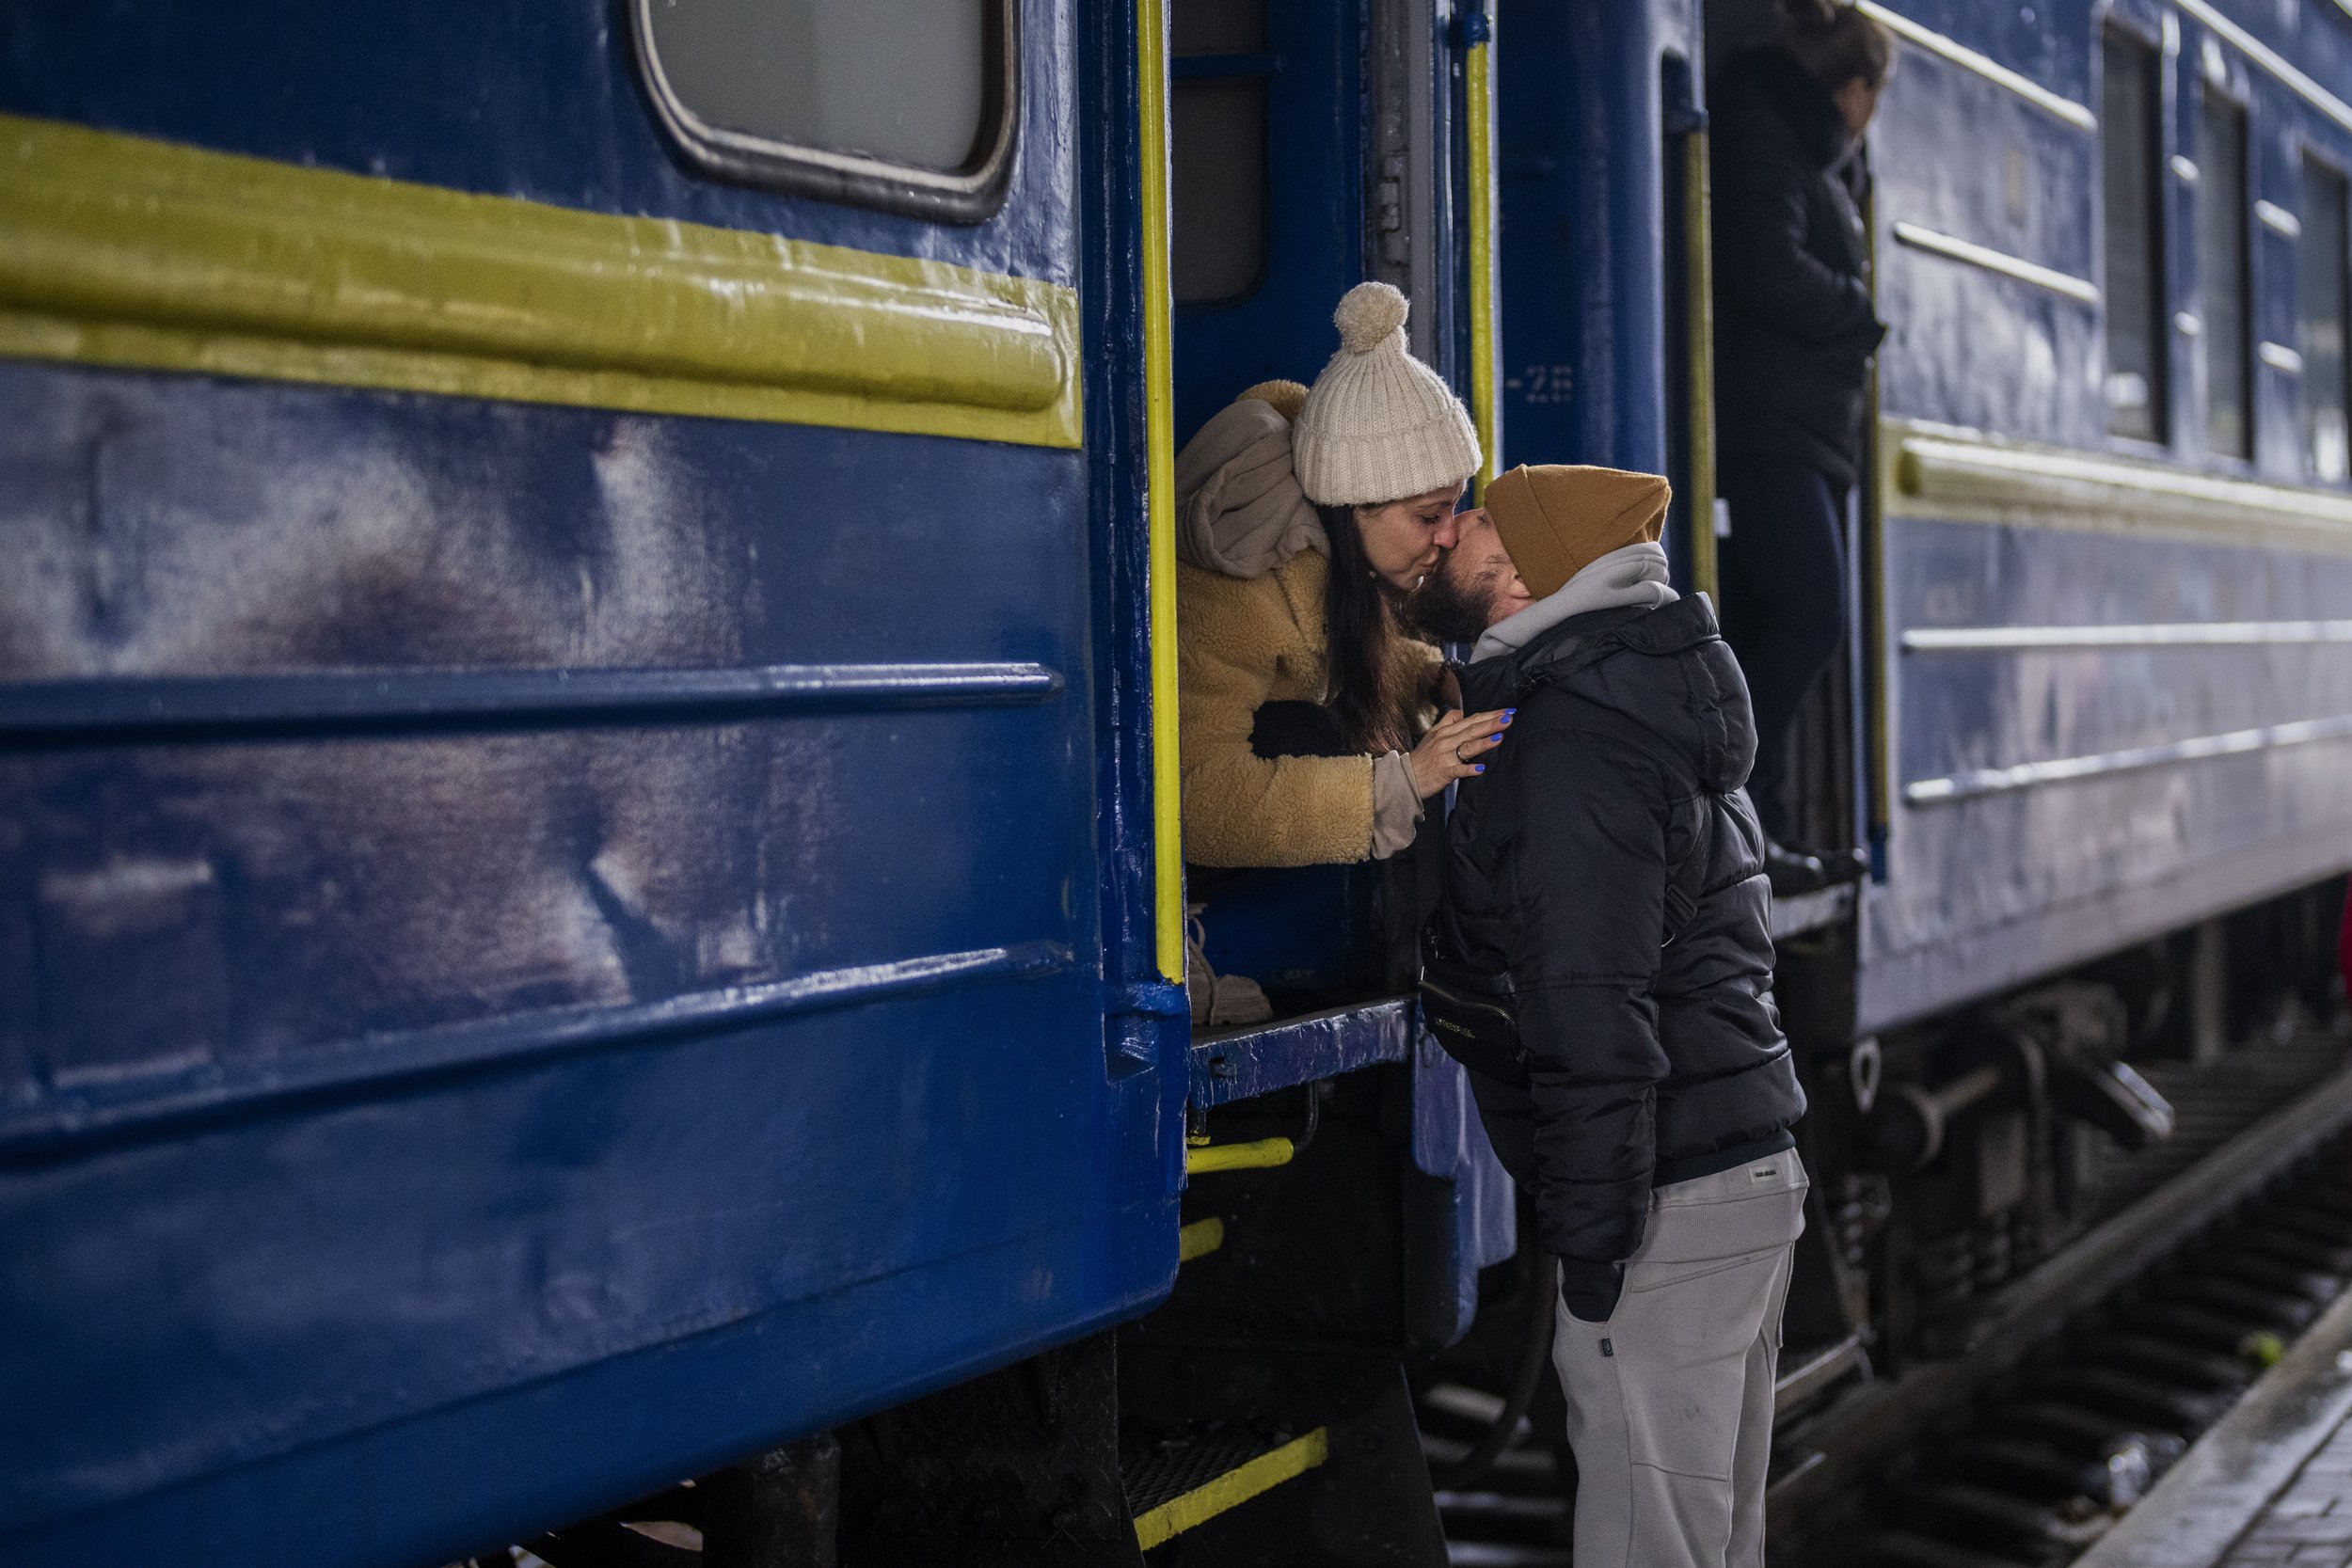  Stanislav, 40, kisses his wife Anna, 35, on a train to Lviv as they say goodbye at the Kyiv station, Ukraine, Thursday, March 3. 2022. Stanislav is staying to fight while his family is leaving the country to seek refuge in a neighboring country. (AP